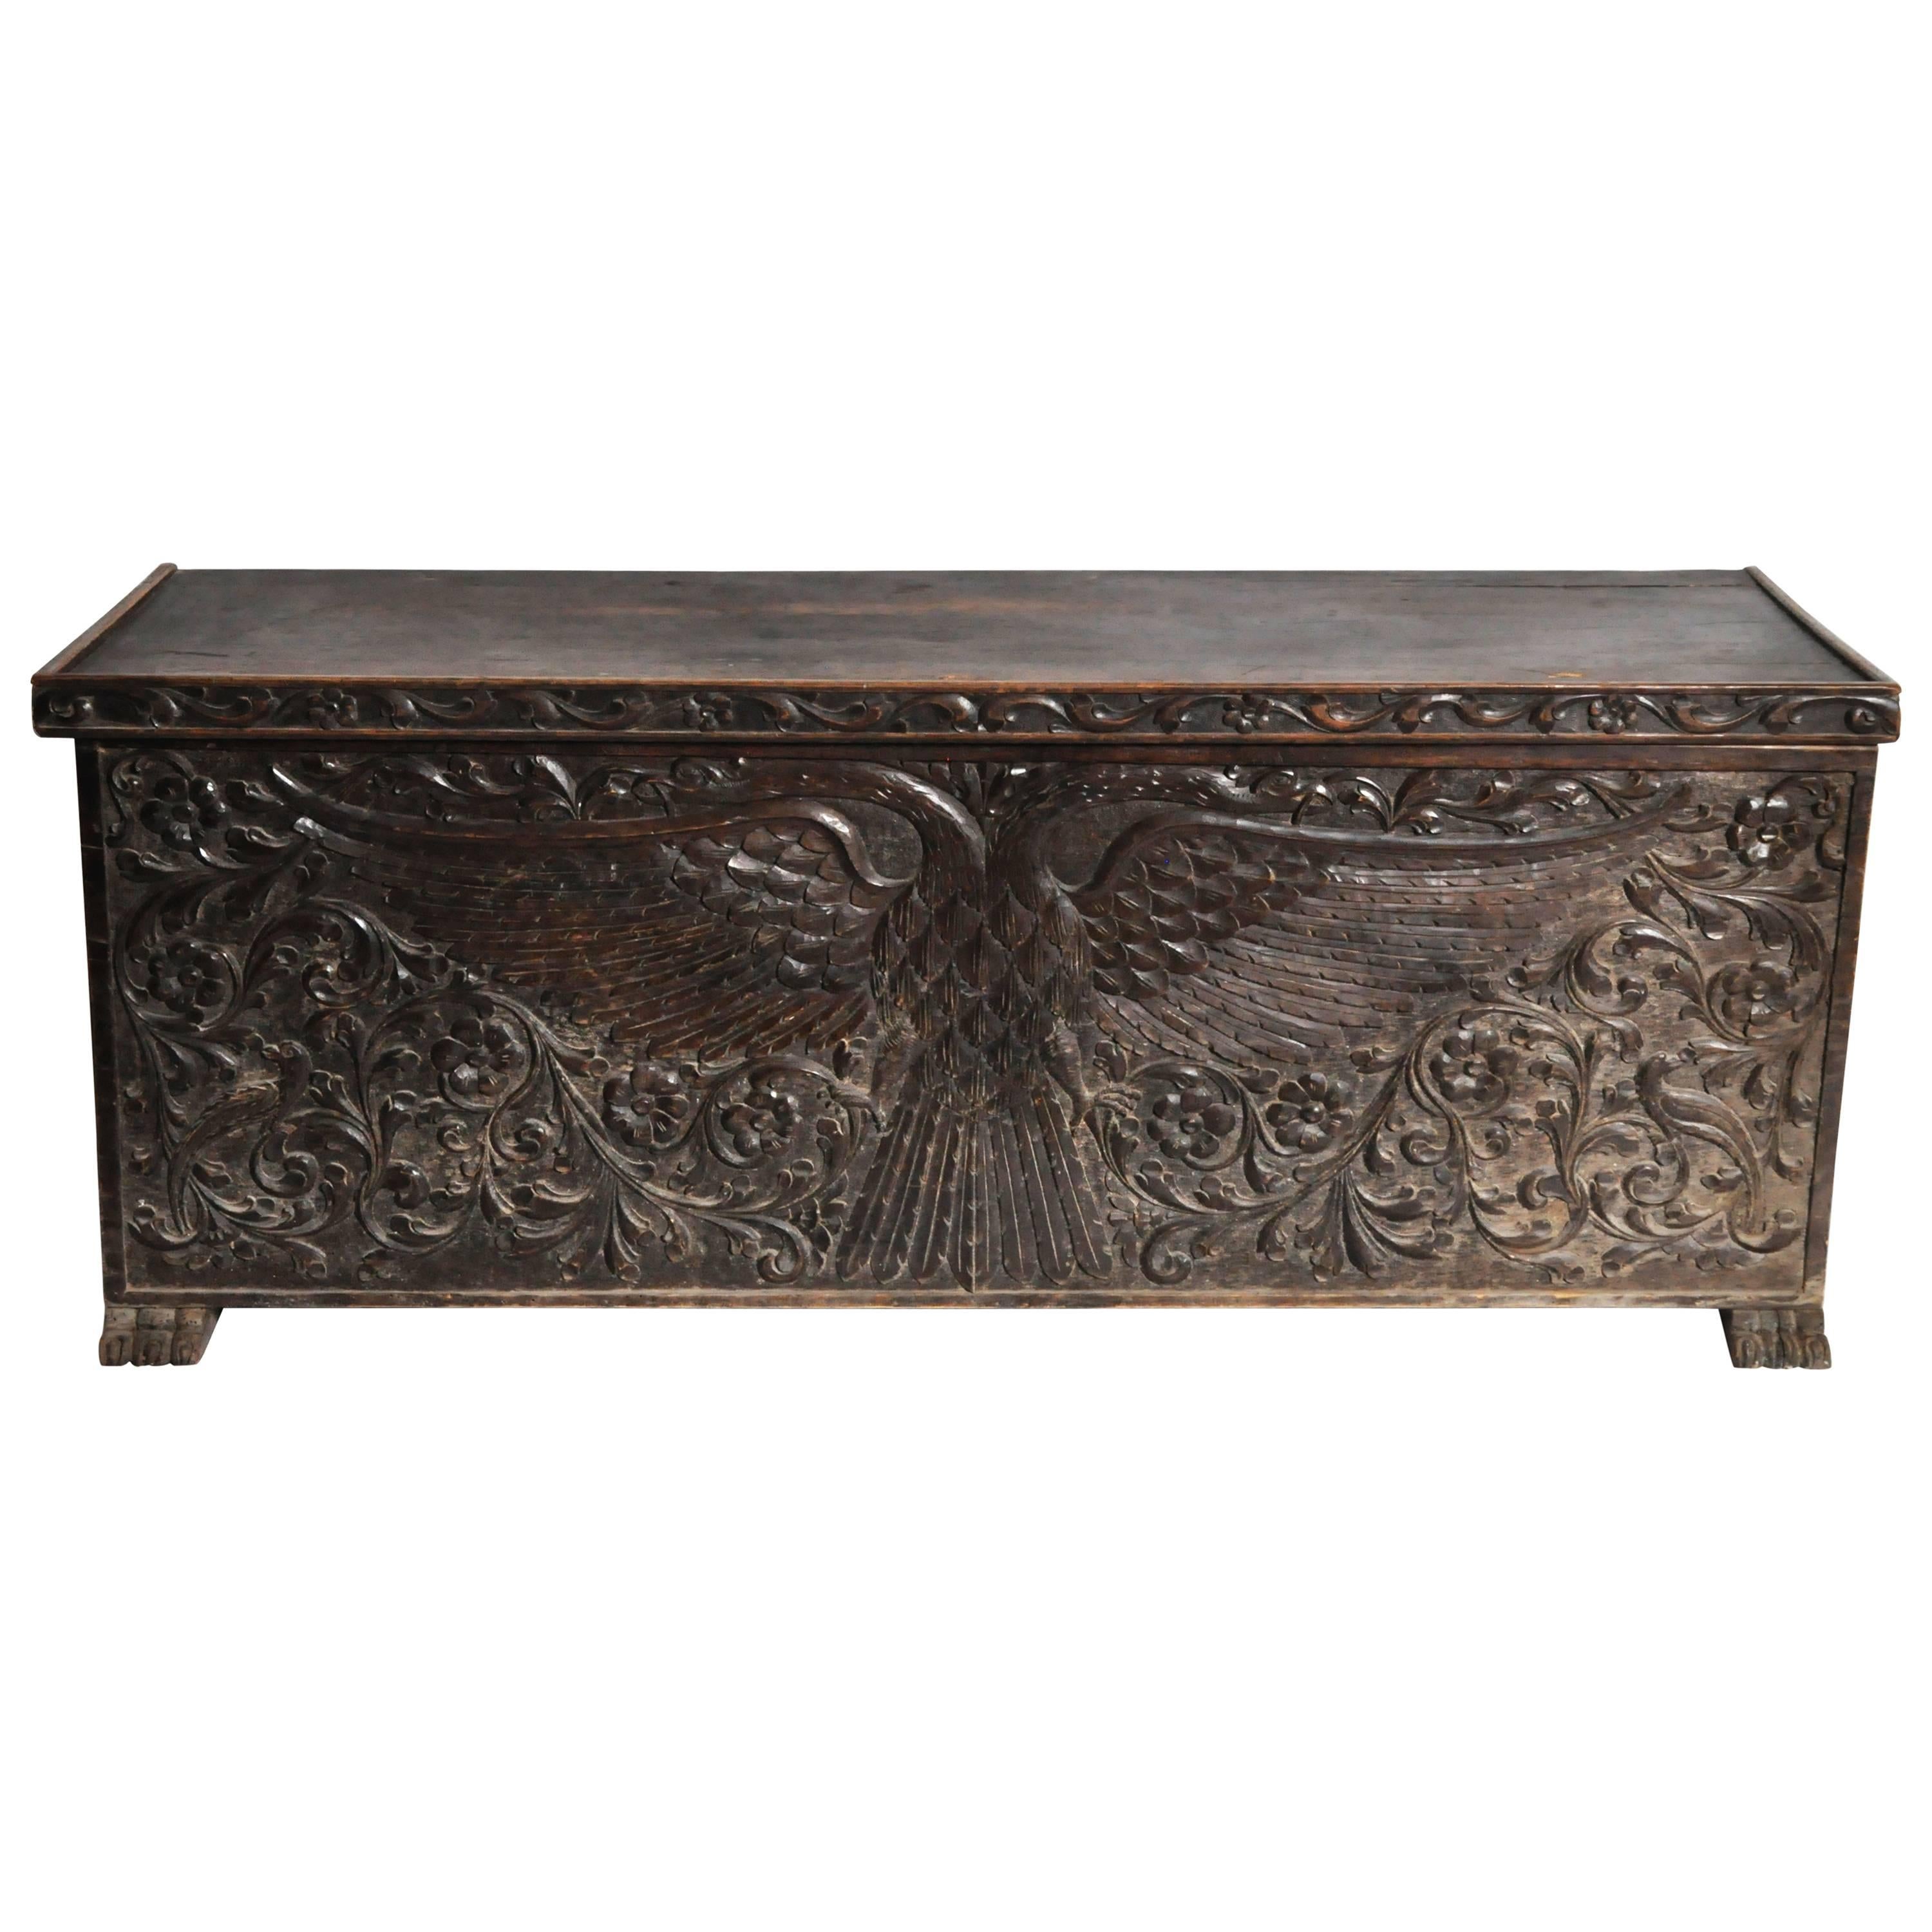 Imperial Double-Eagle Design Coffer